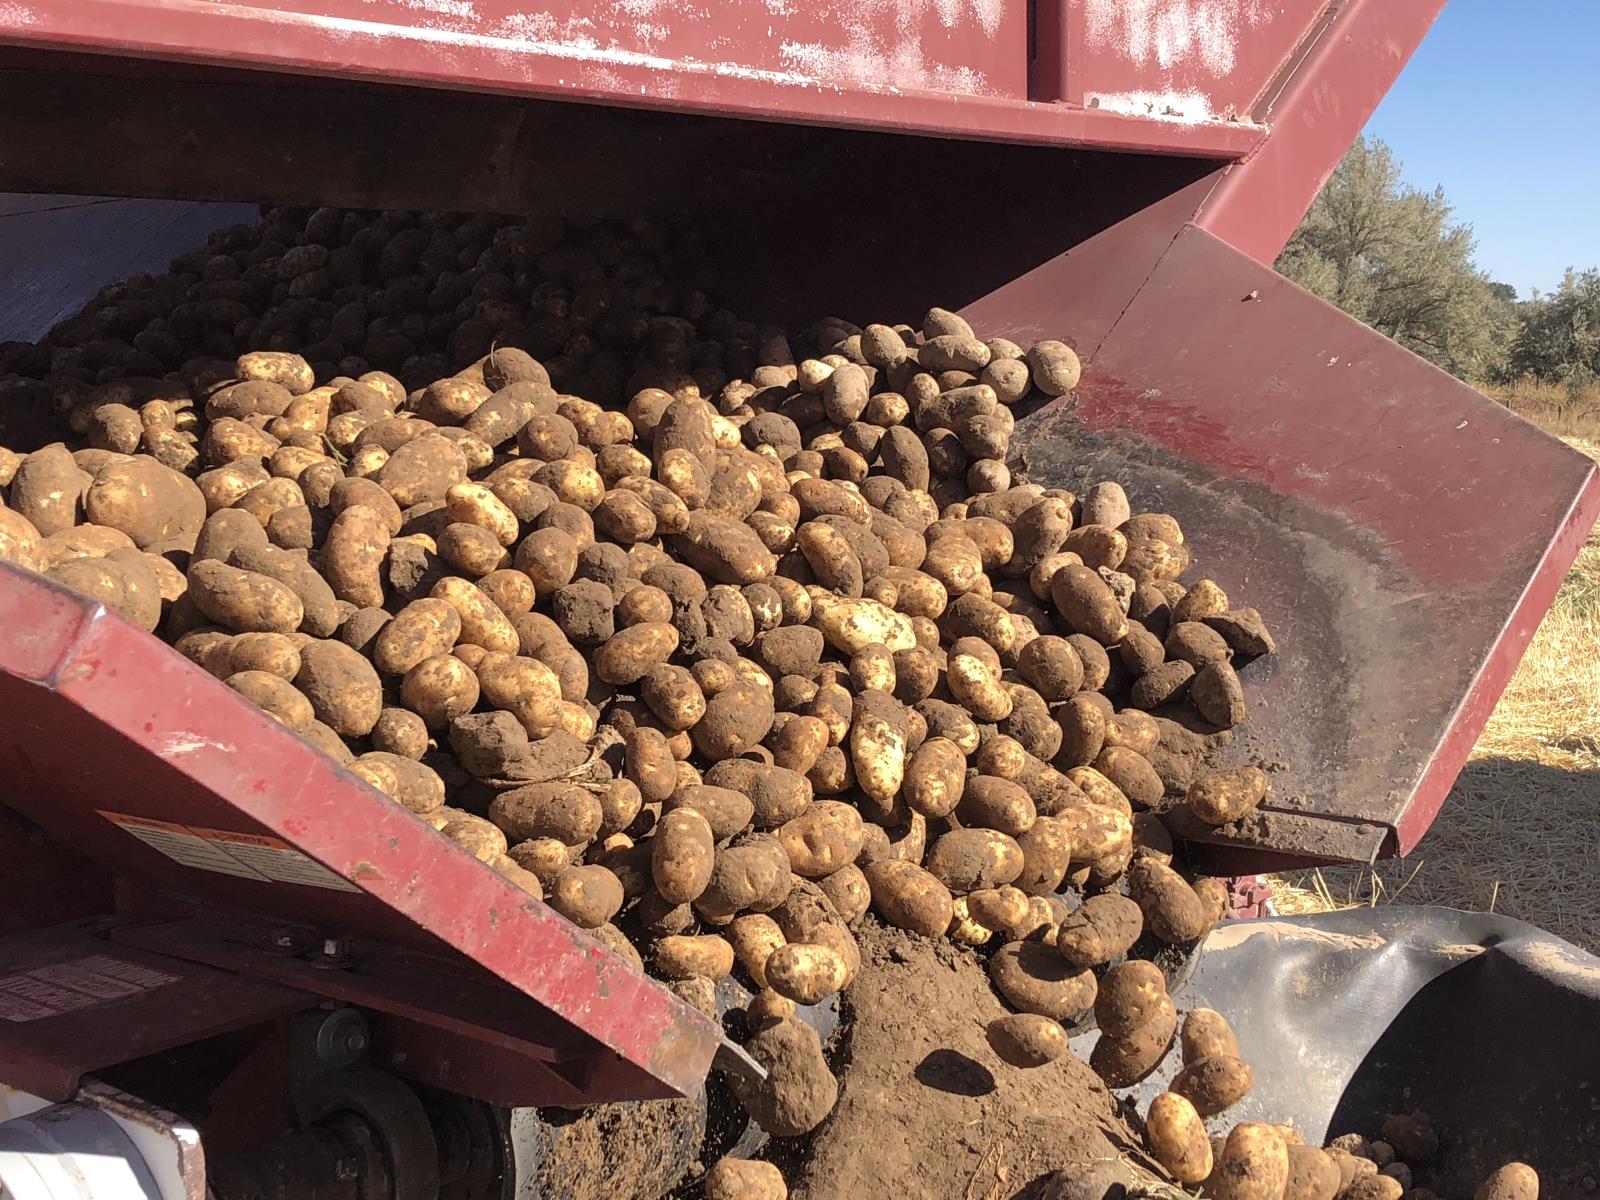 State and national potato industry groups are pushing to make a major coronavirus farm relief program more equitable for fruits and vegetables, including spuds.